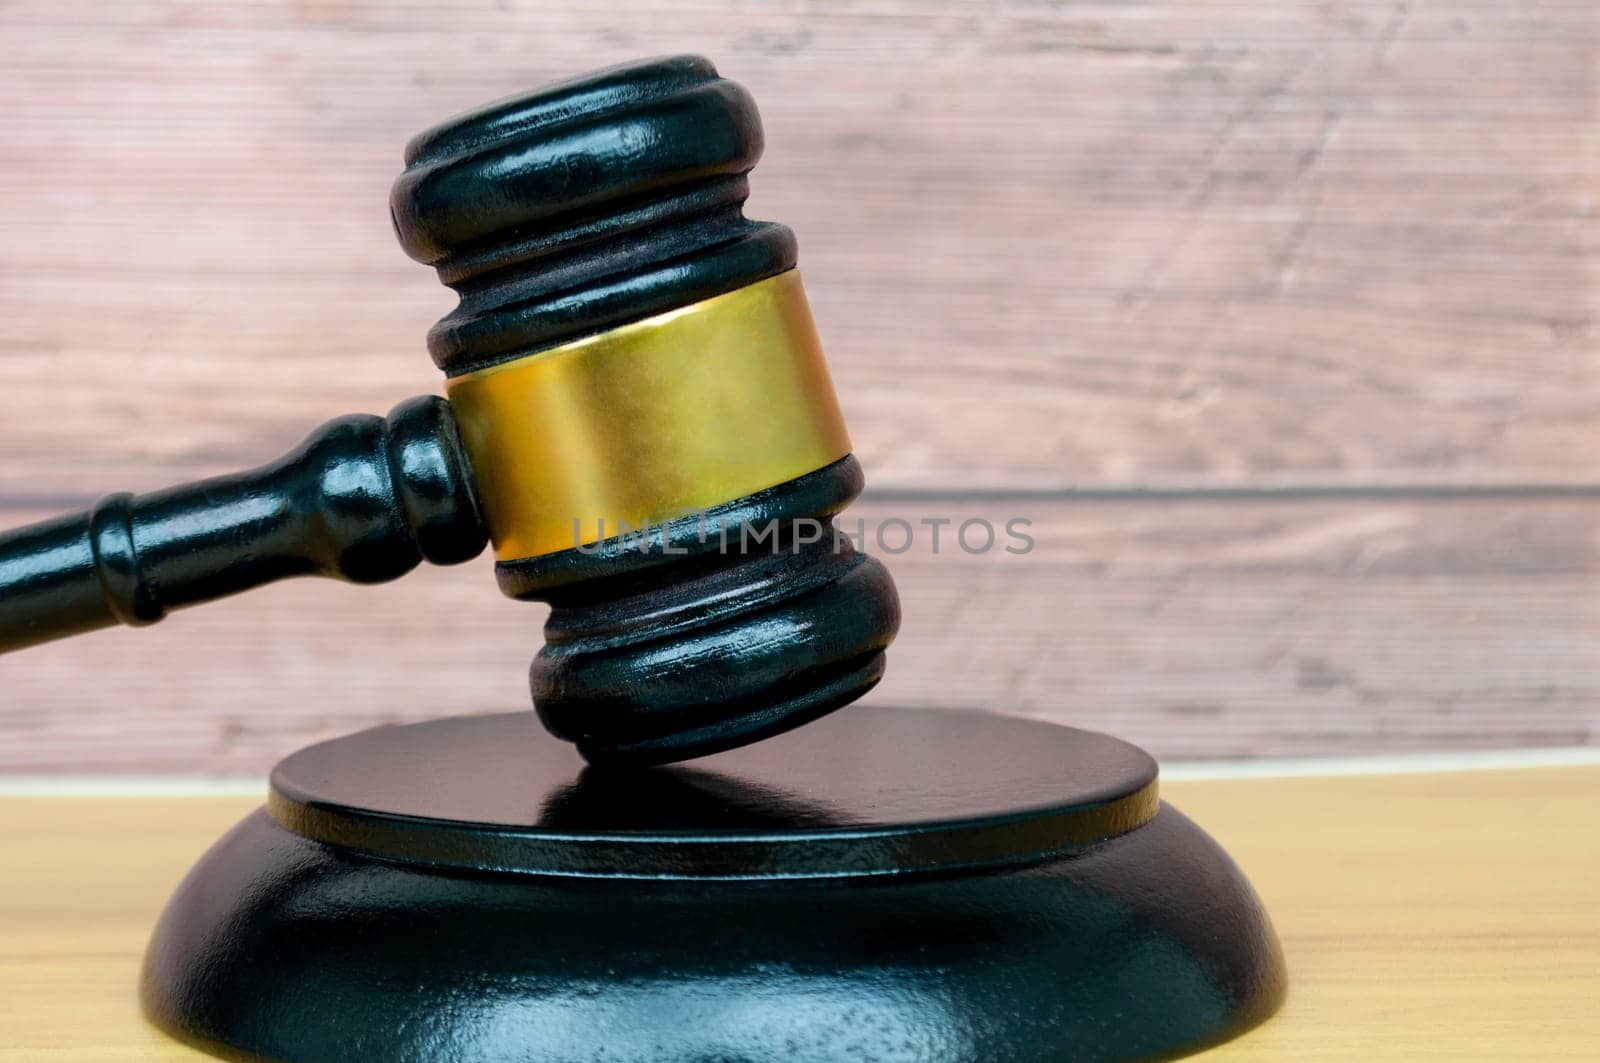 Gavel on wooden background with customizable space for text or law matters. Law concept by yom98